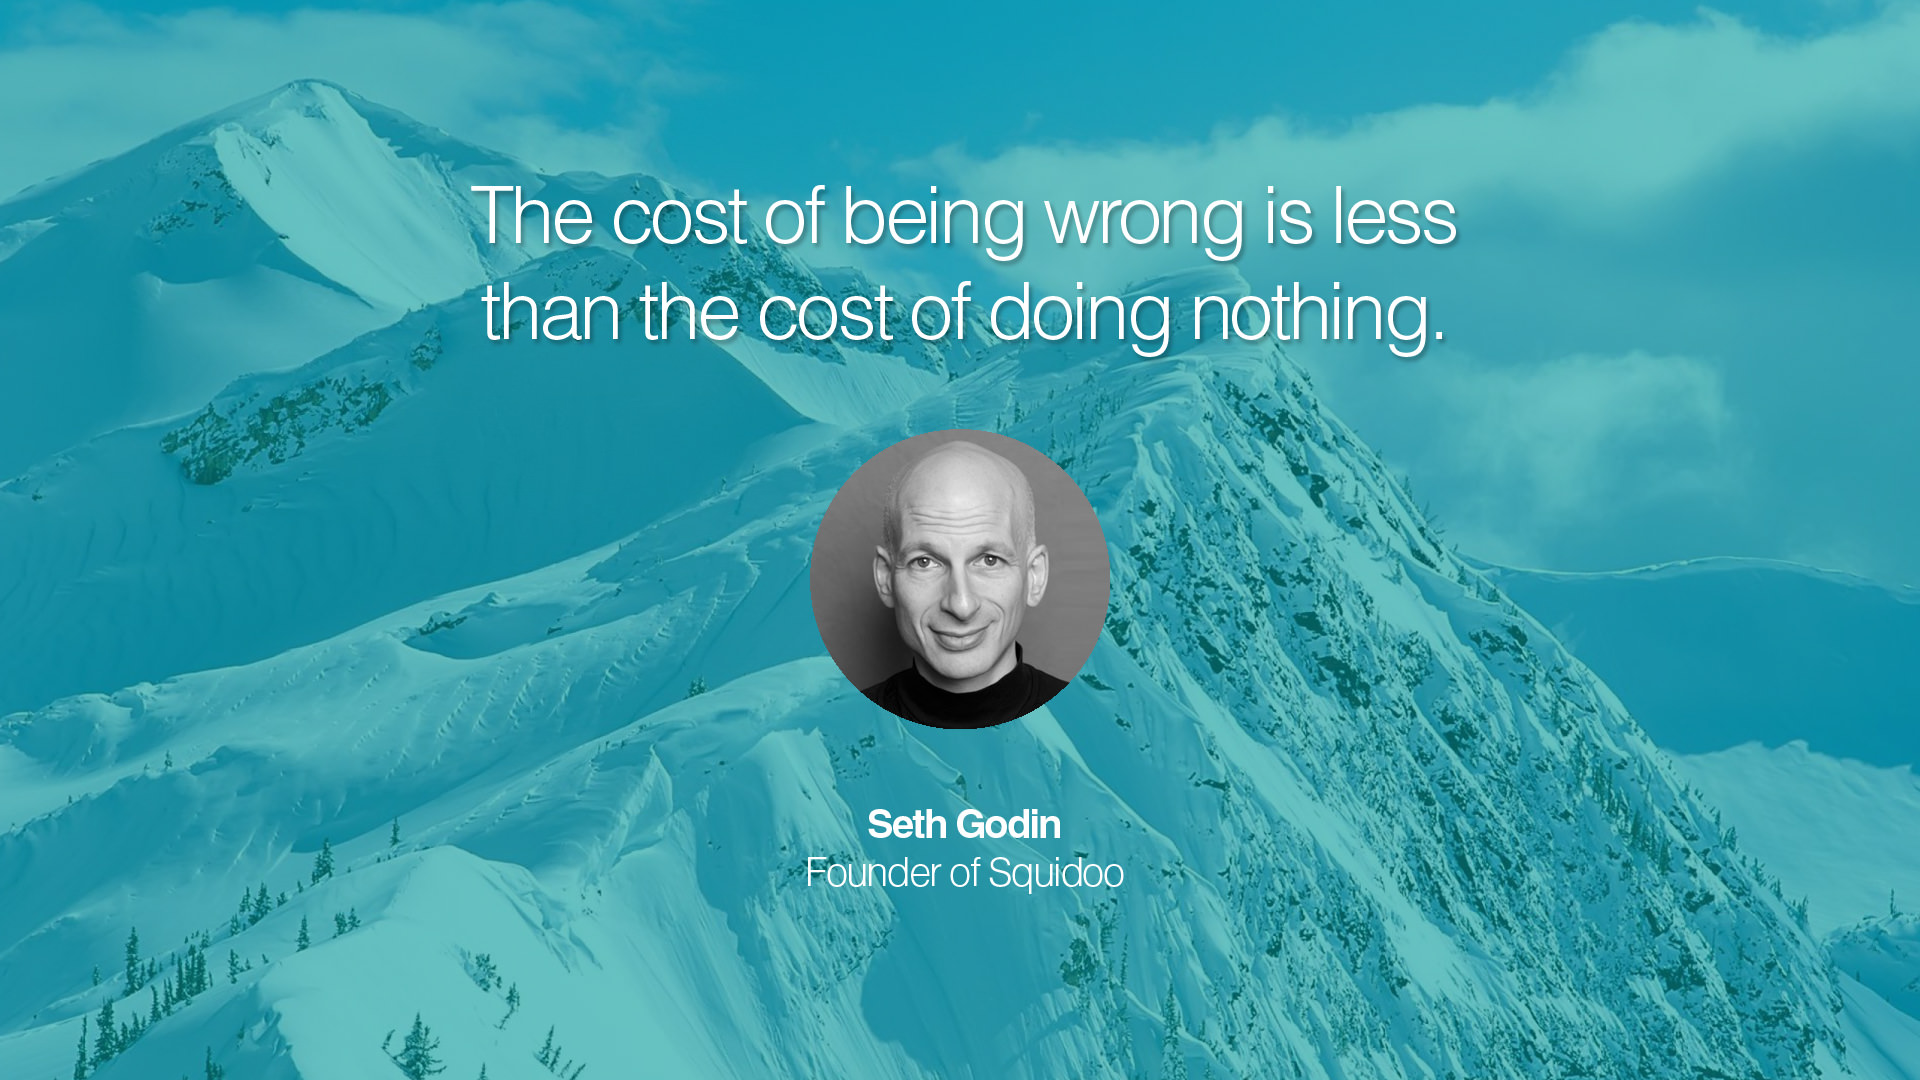 Seth Godin’s most Inspirational quotes. Seth Godin’s most Motivation quotes. Less wrong